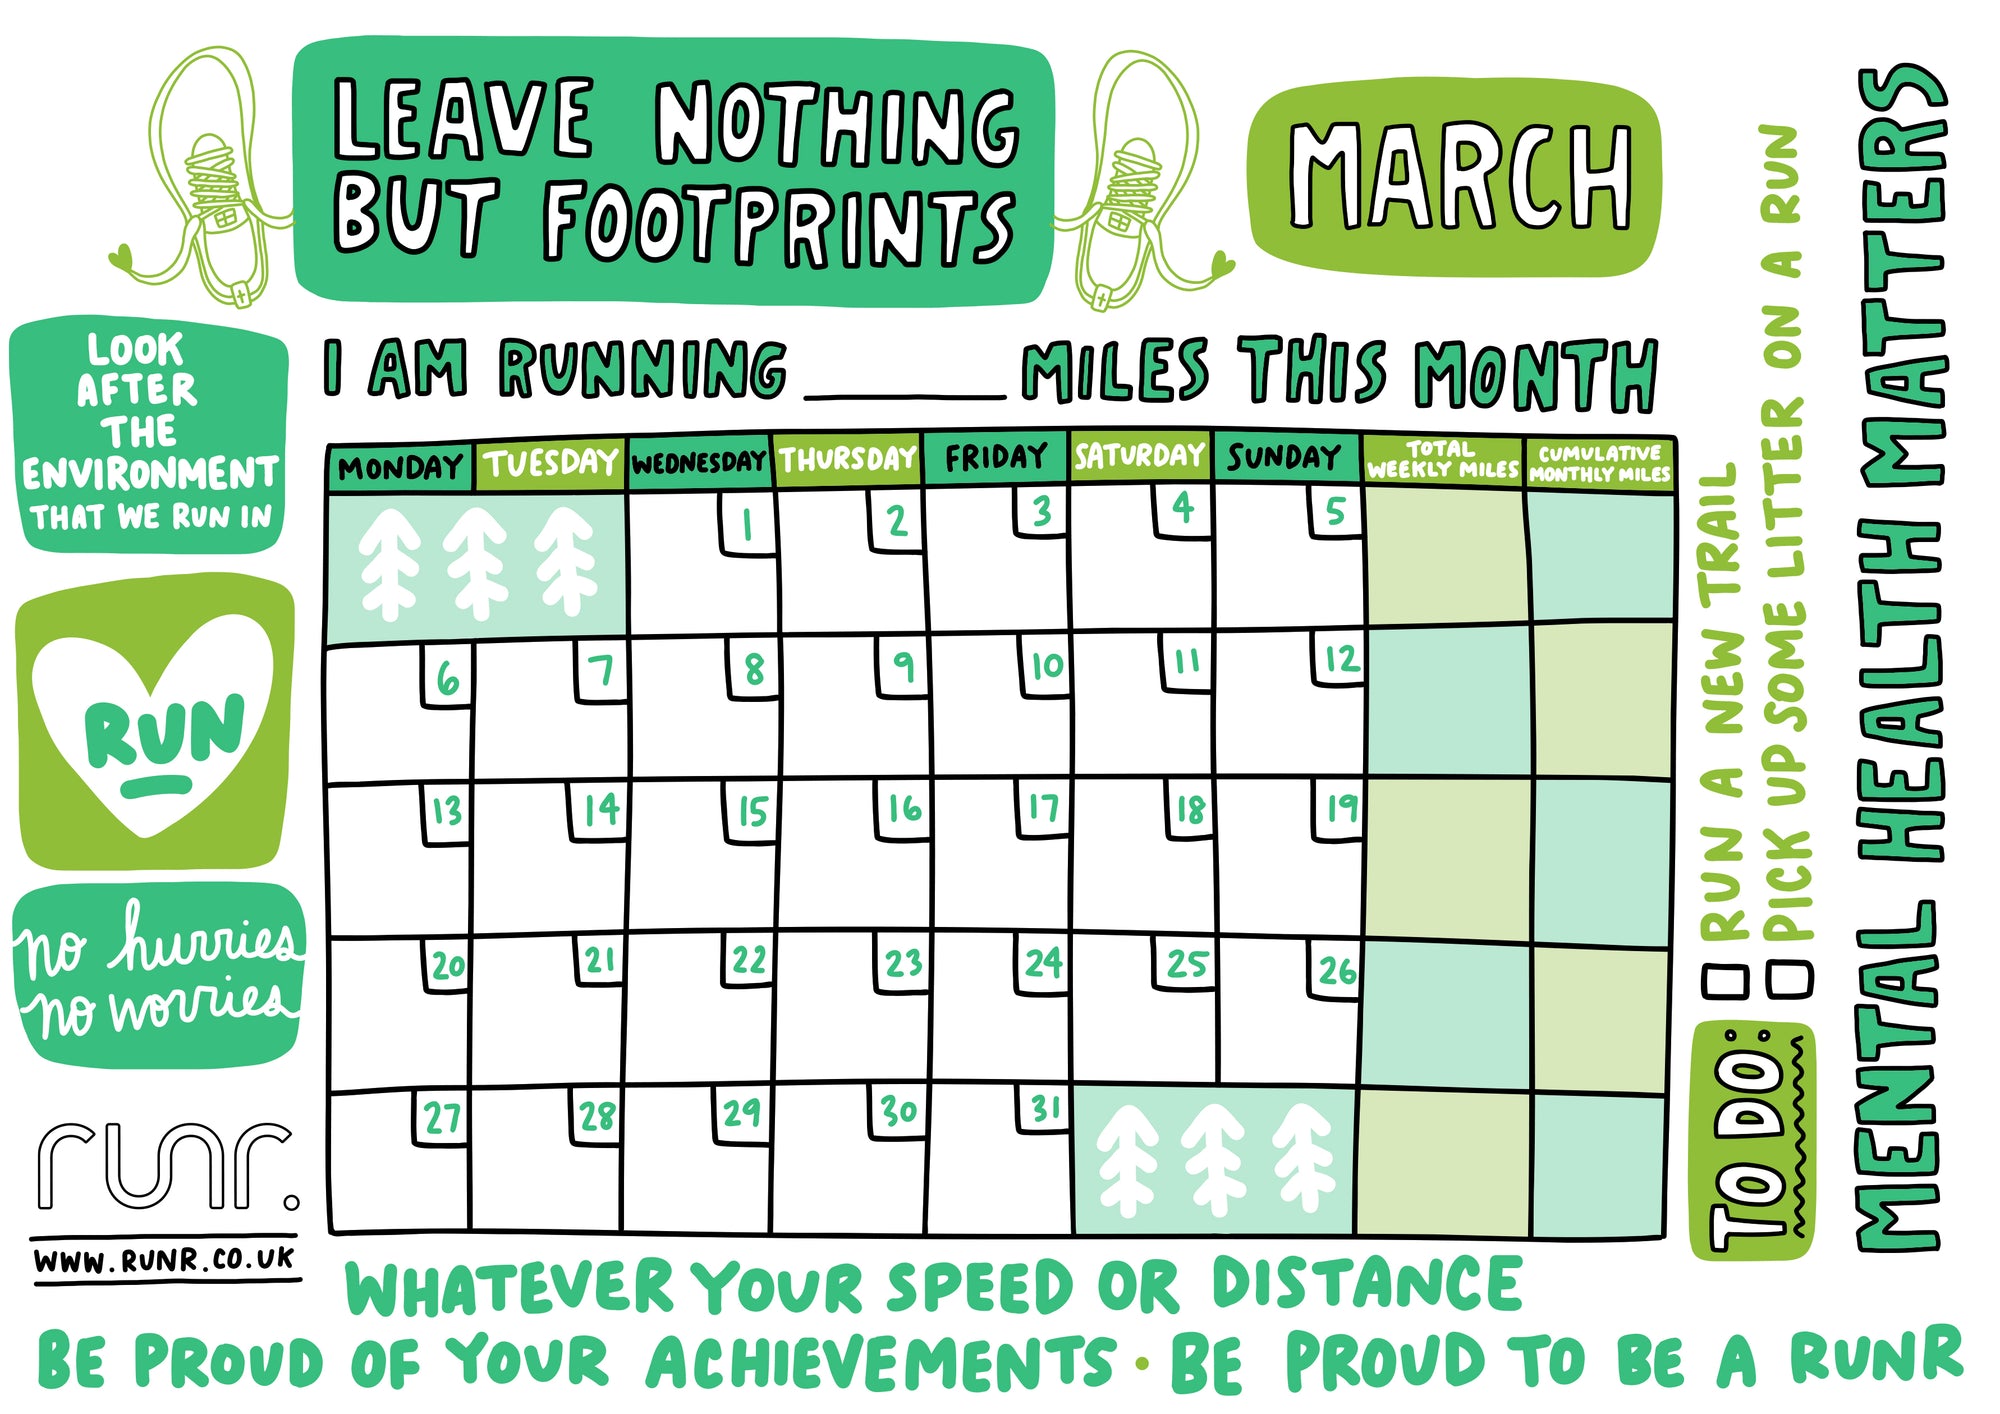 March 2023 Mileage Tracker - Free to Download!